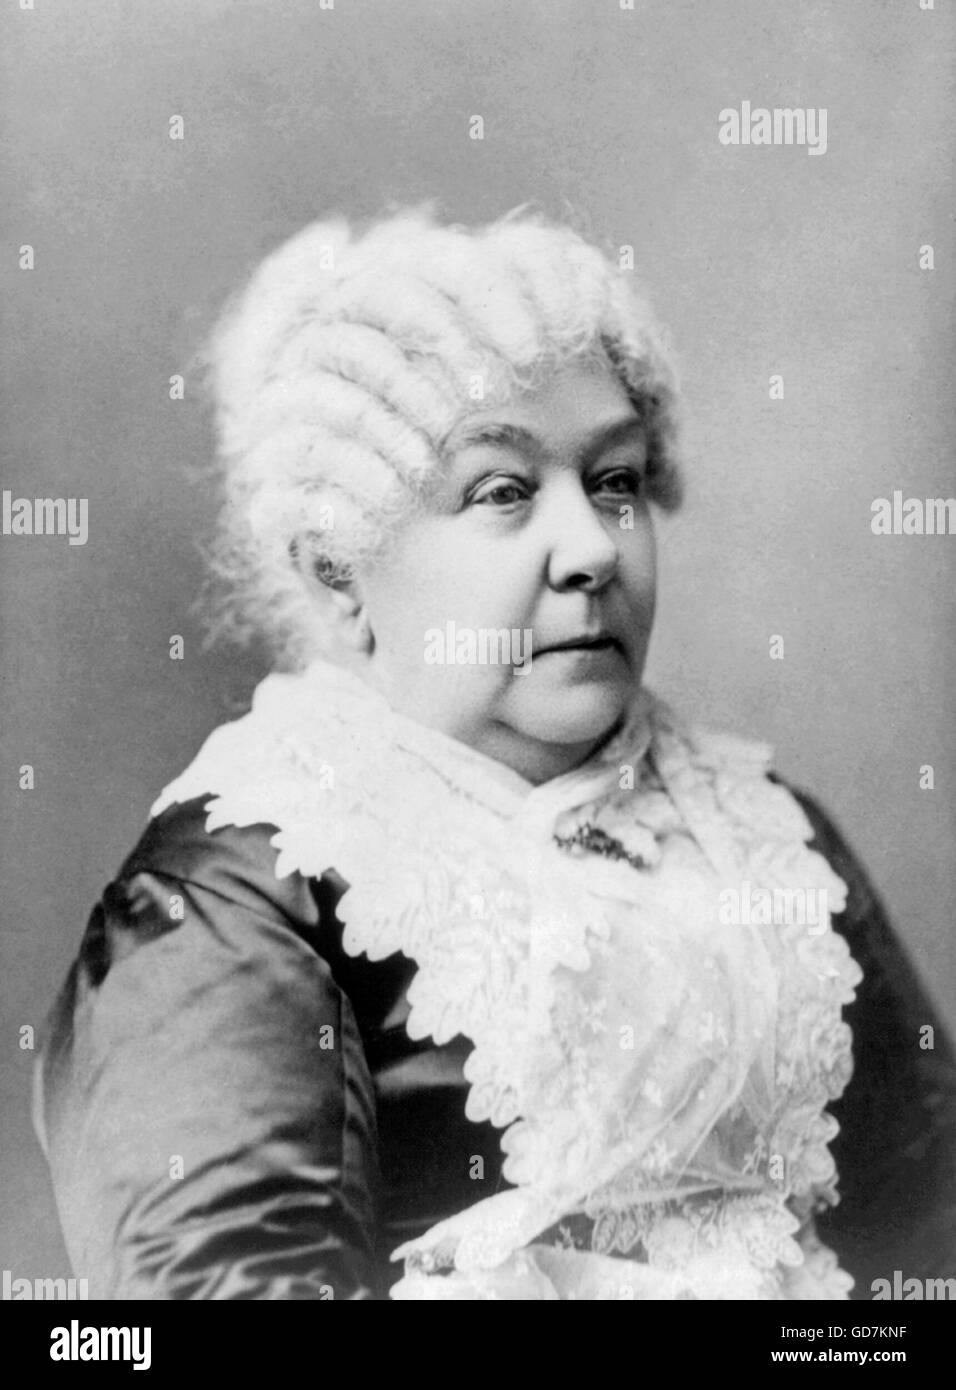 Elizabeth Cady Stanton (1815- 1902), an American suffragist, social activist, abolitionist, and leading figure of the early women's rights movement. Photo taken between 1880 and 1902. Stock Photo